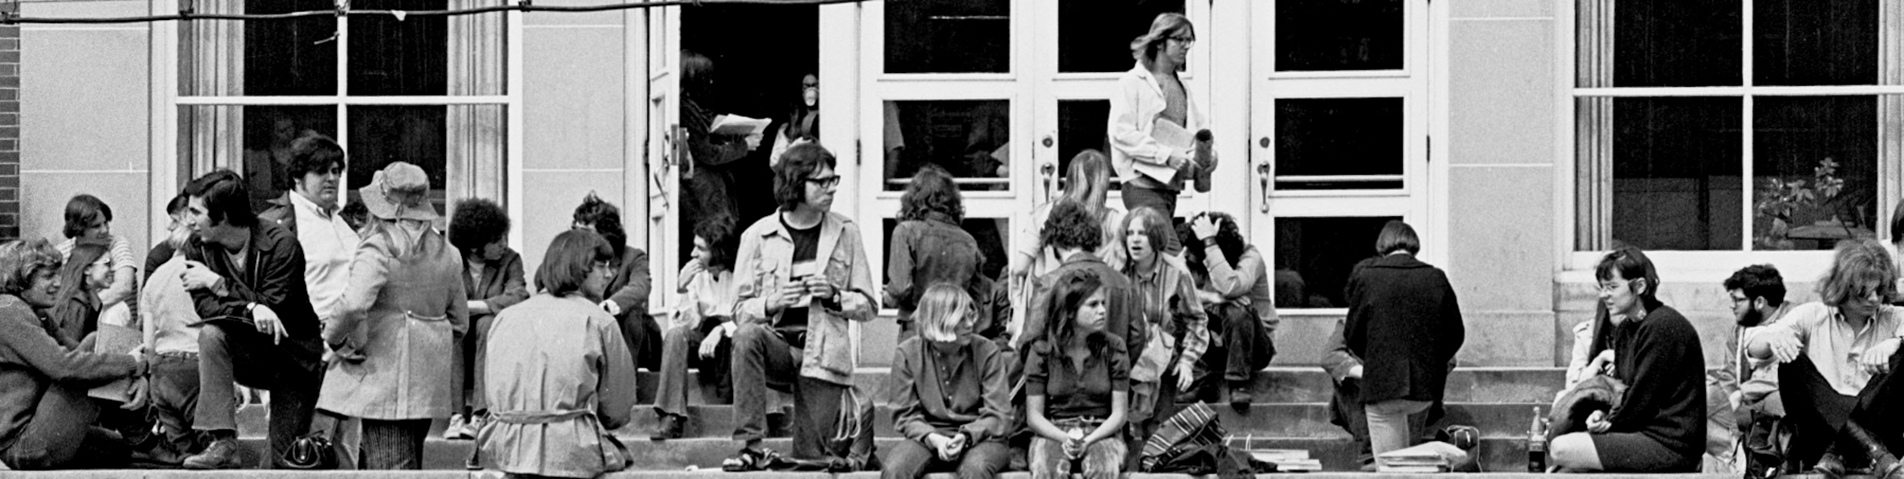 students on Baker Wall -vintage - retro